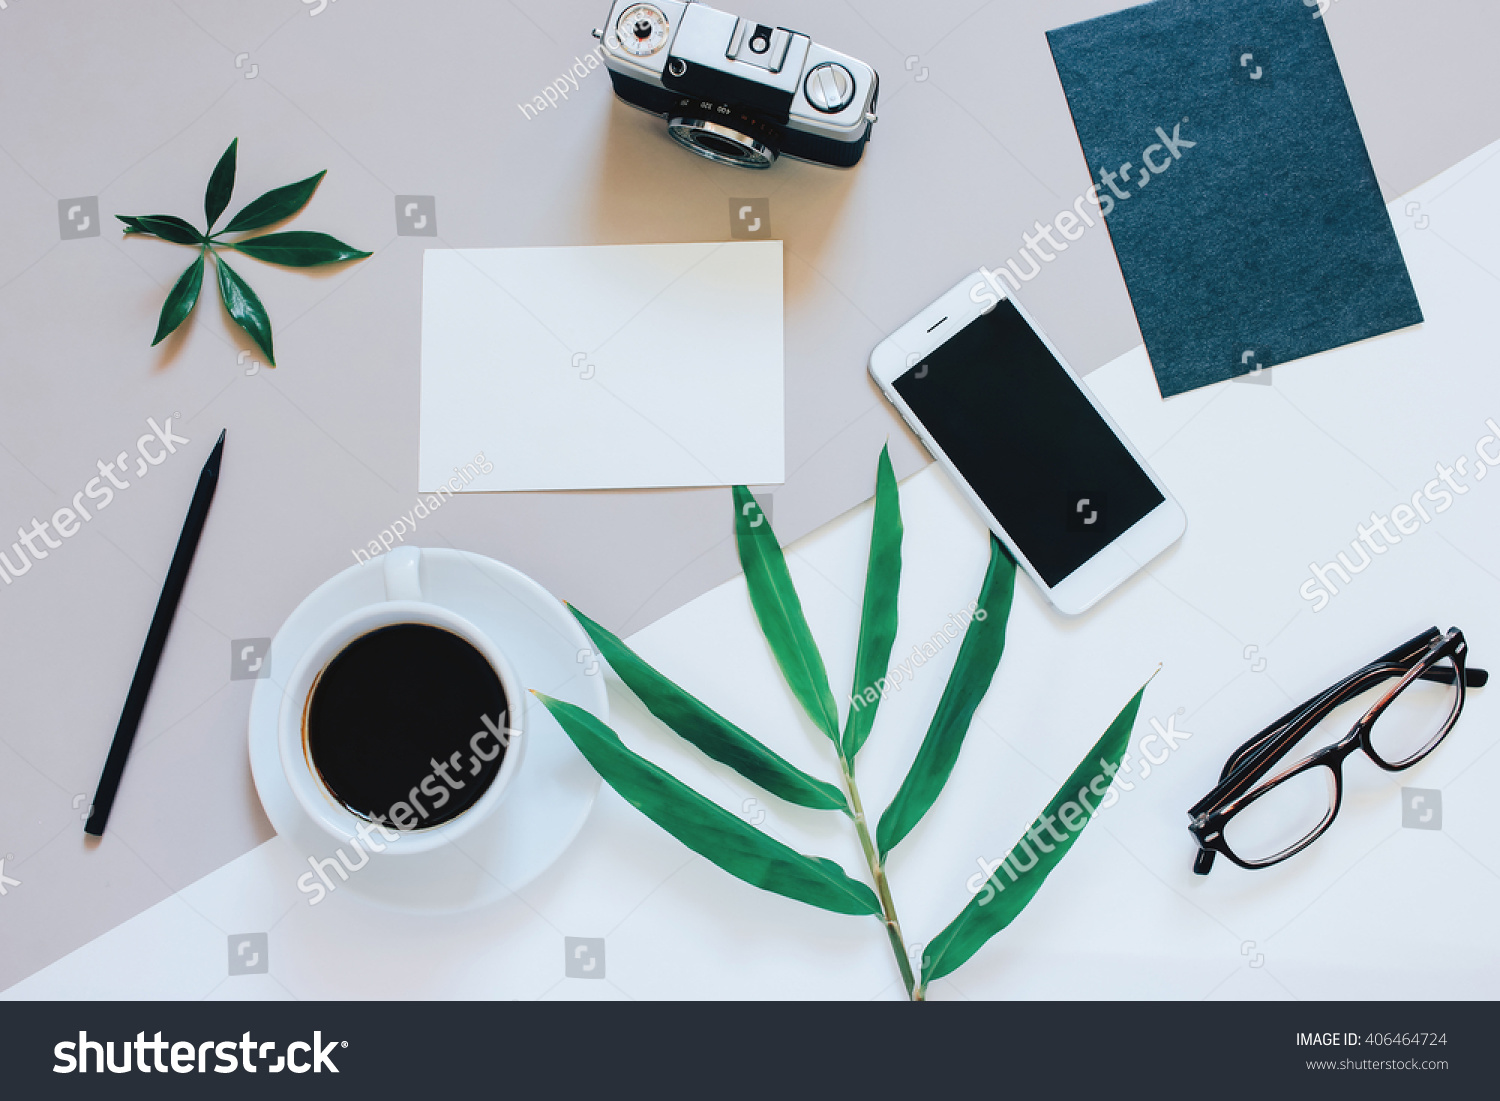 Creative flat lay photo of workspace desk with smartphone, coffee, film camera, blank paper and envelope with copy space background, minimal style
 #406464724